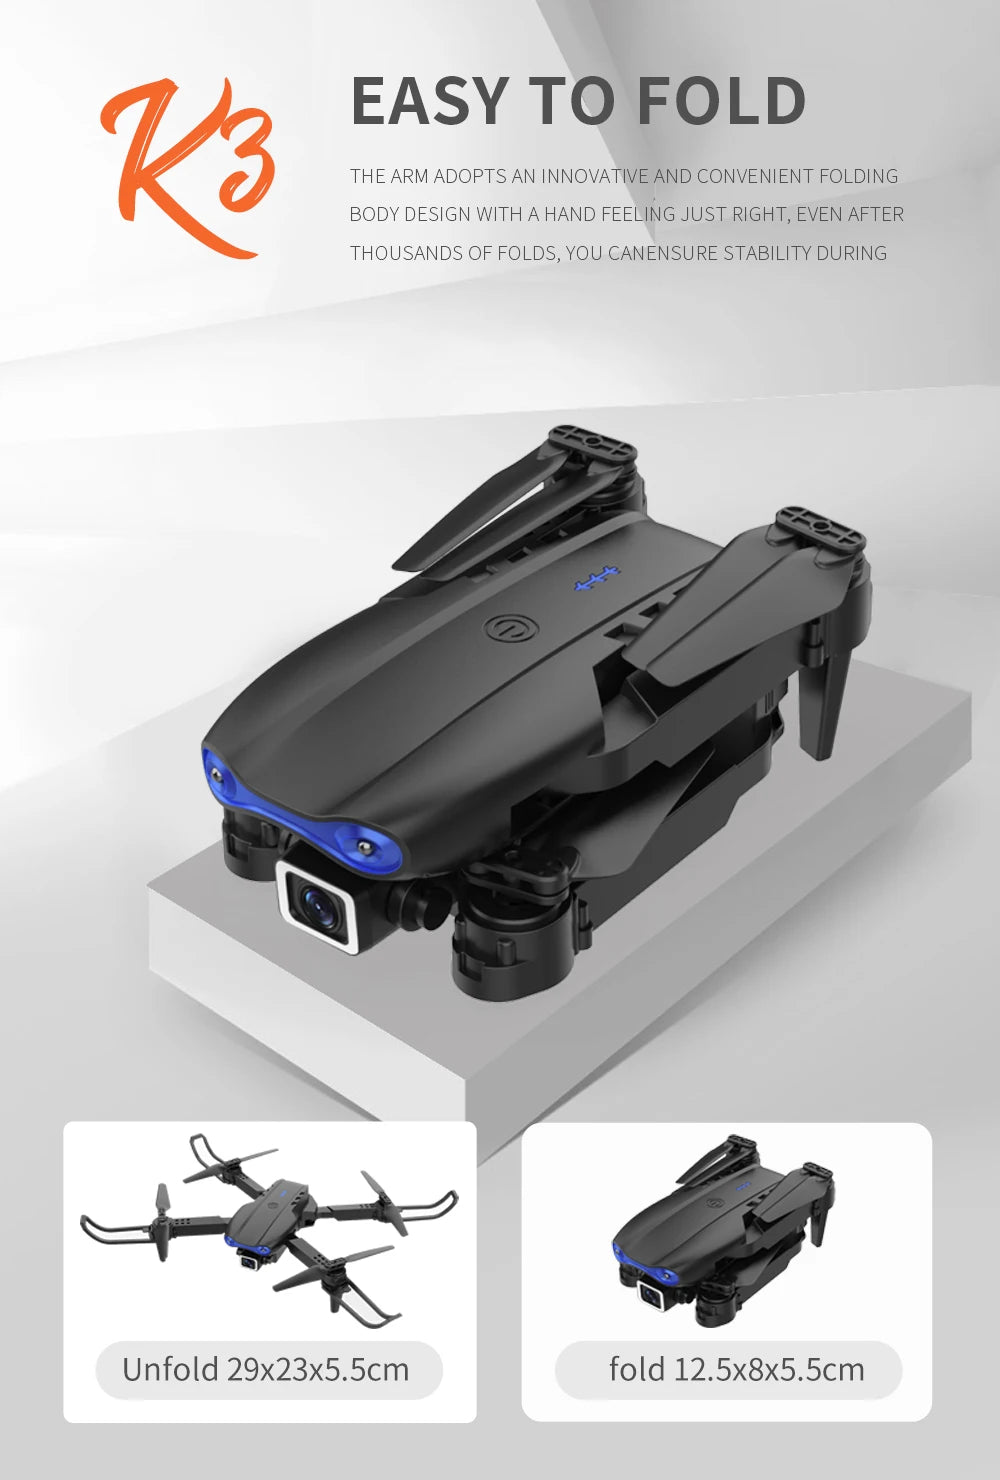 XYRC K3 Mini Drone, easy to fold k3 the arm adopts an innovative and convenient